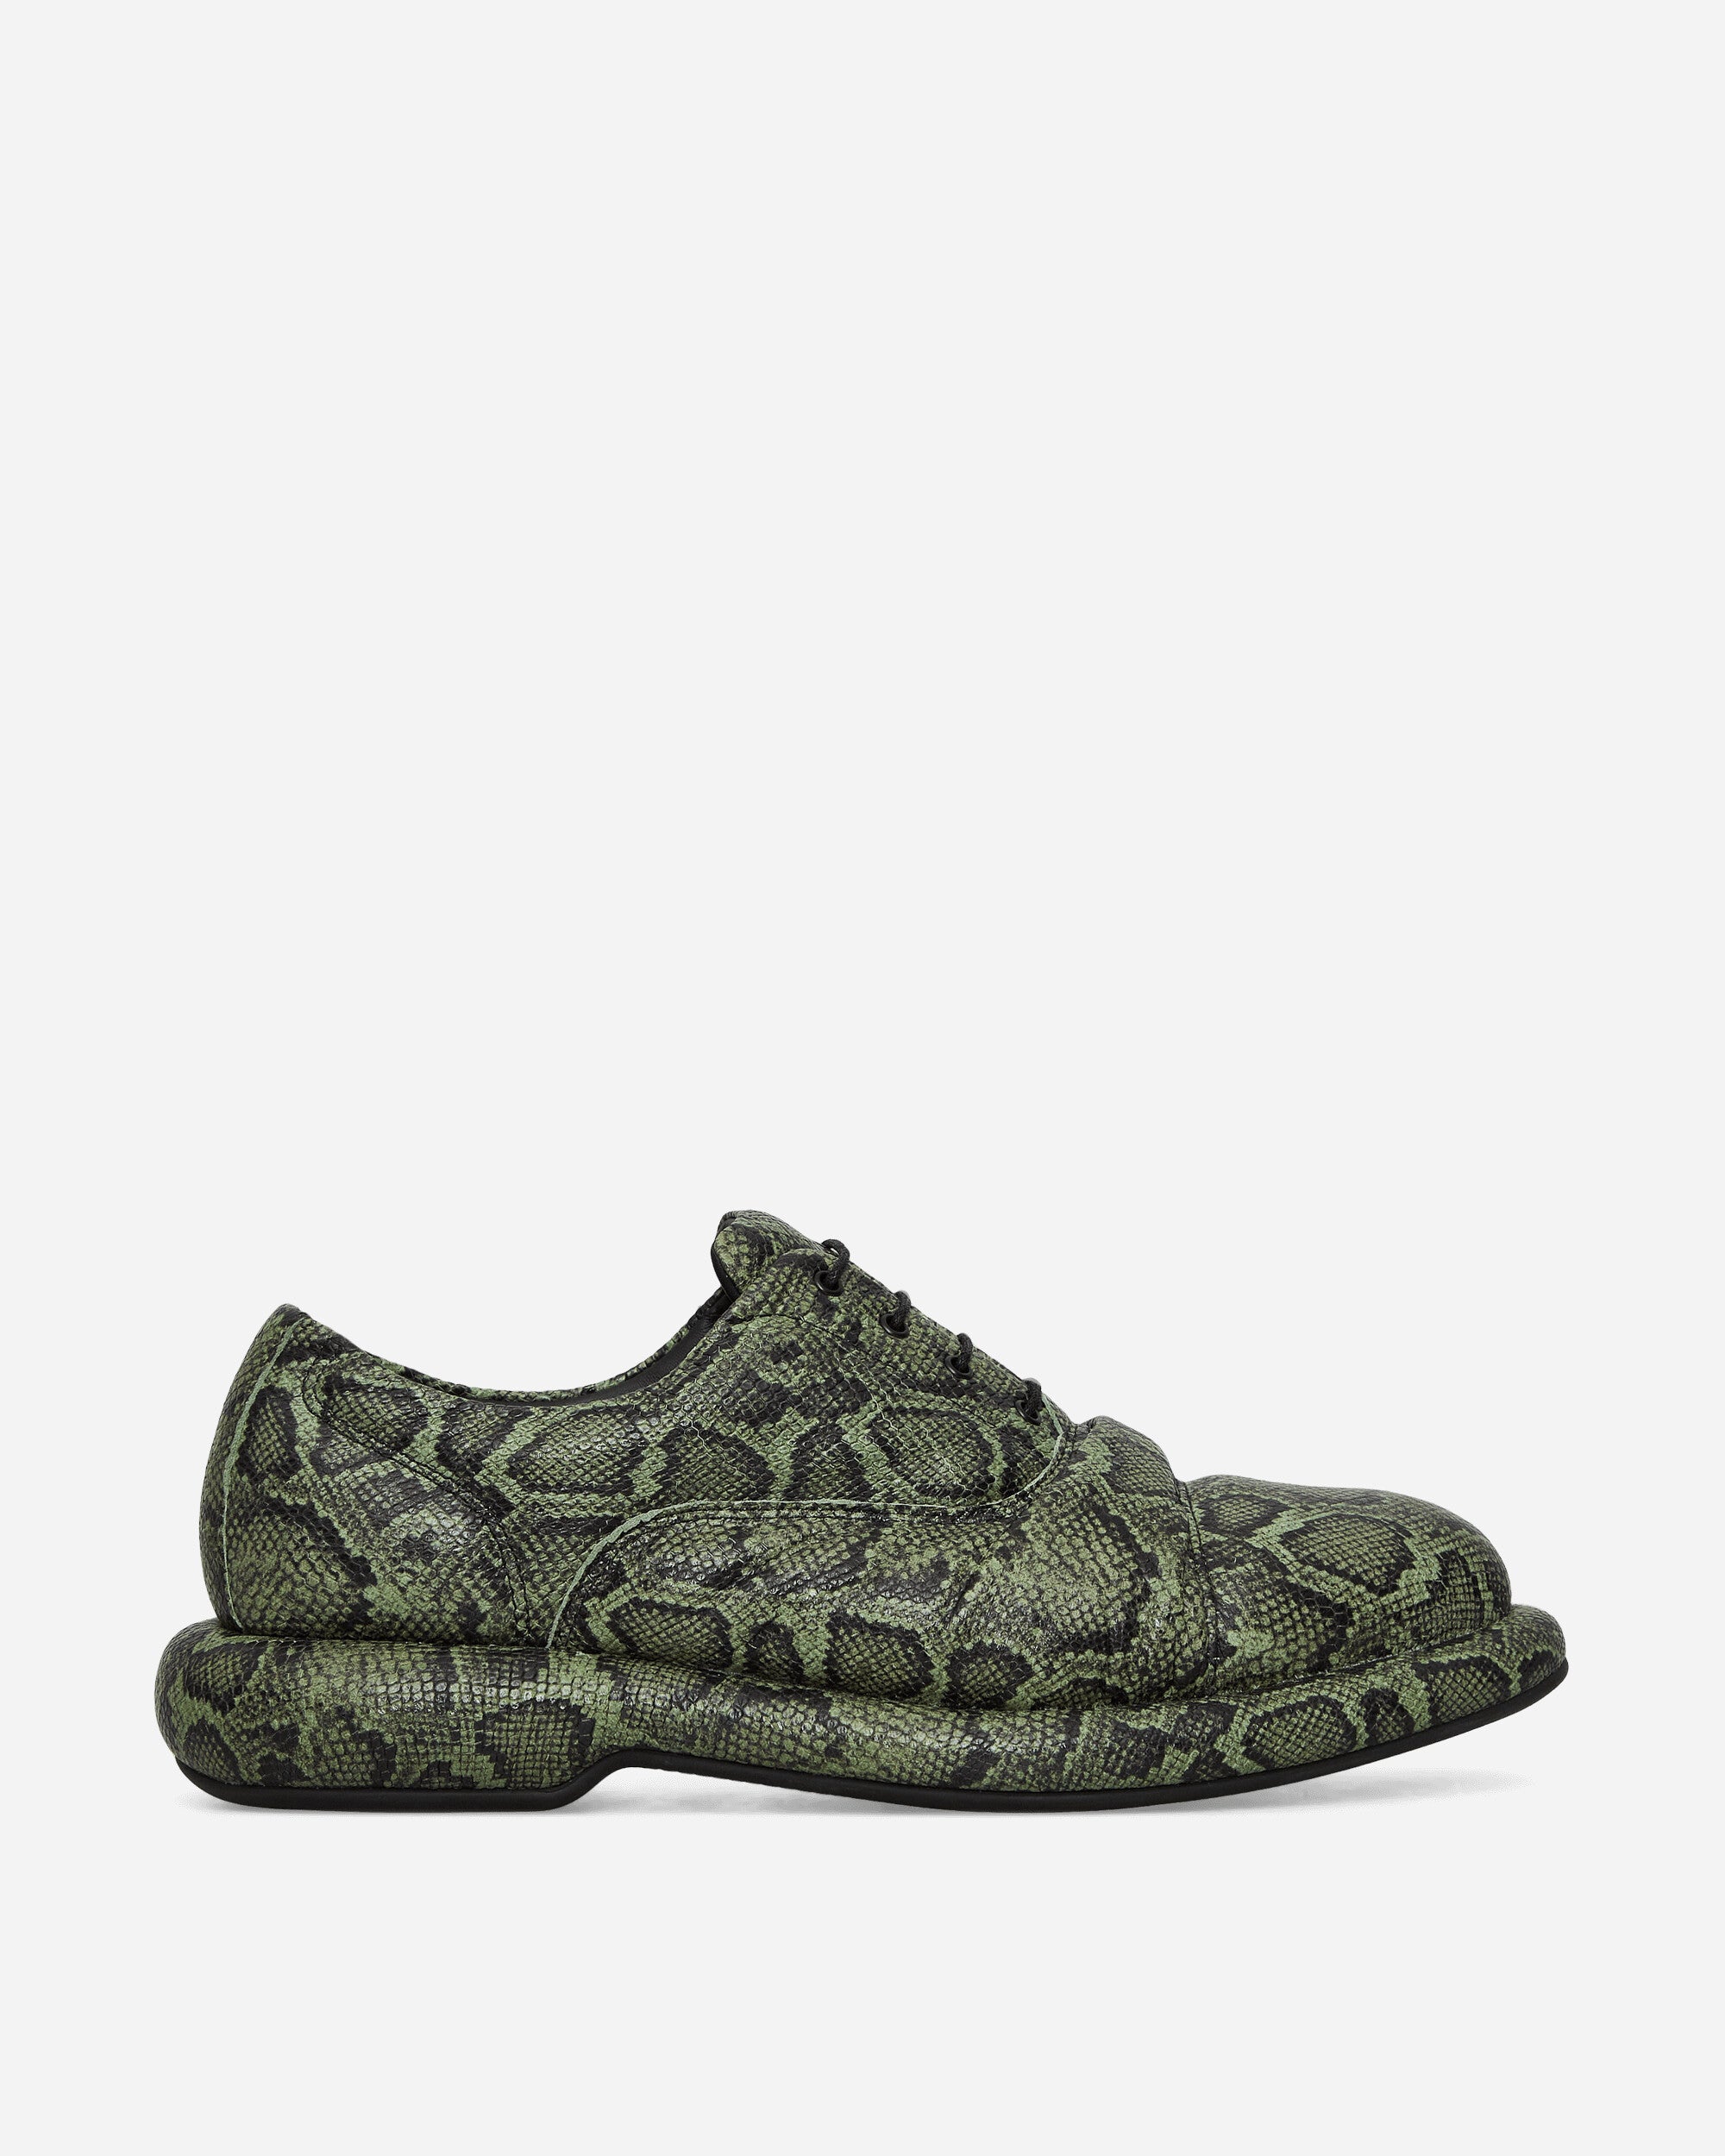 Martine Rose Leather Oxford Green Snake